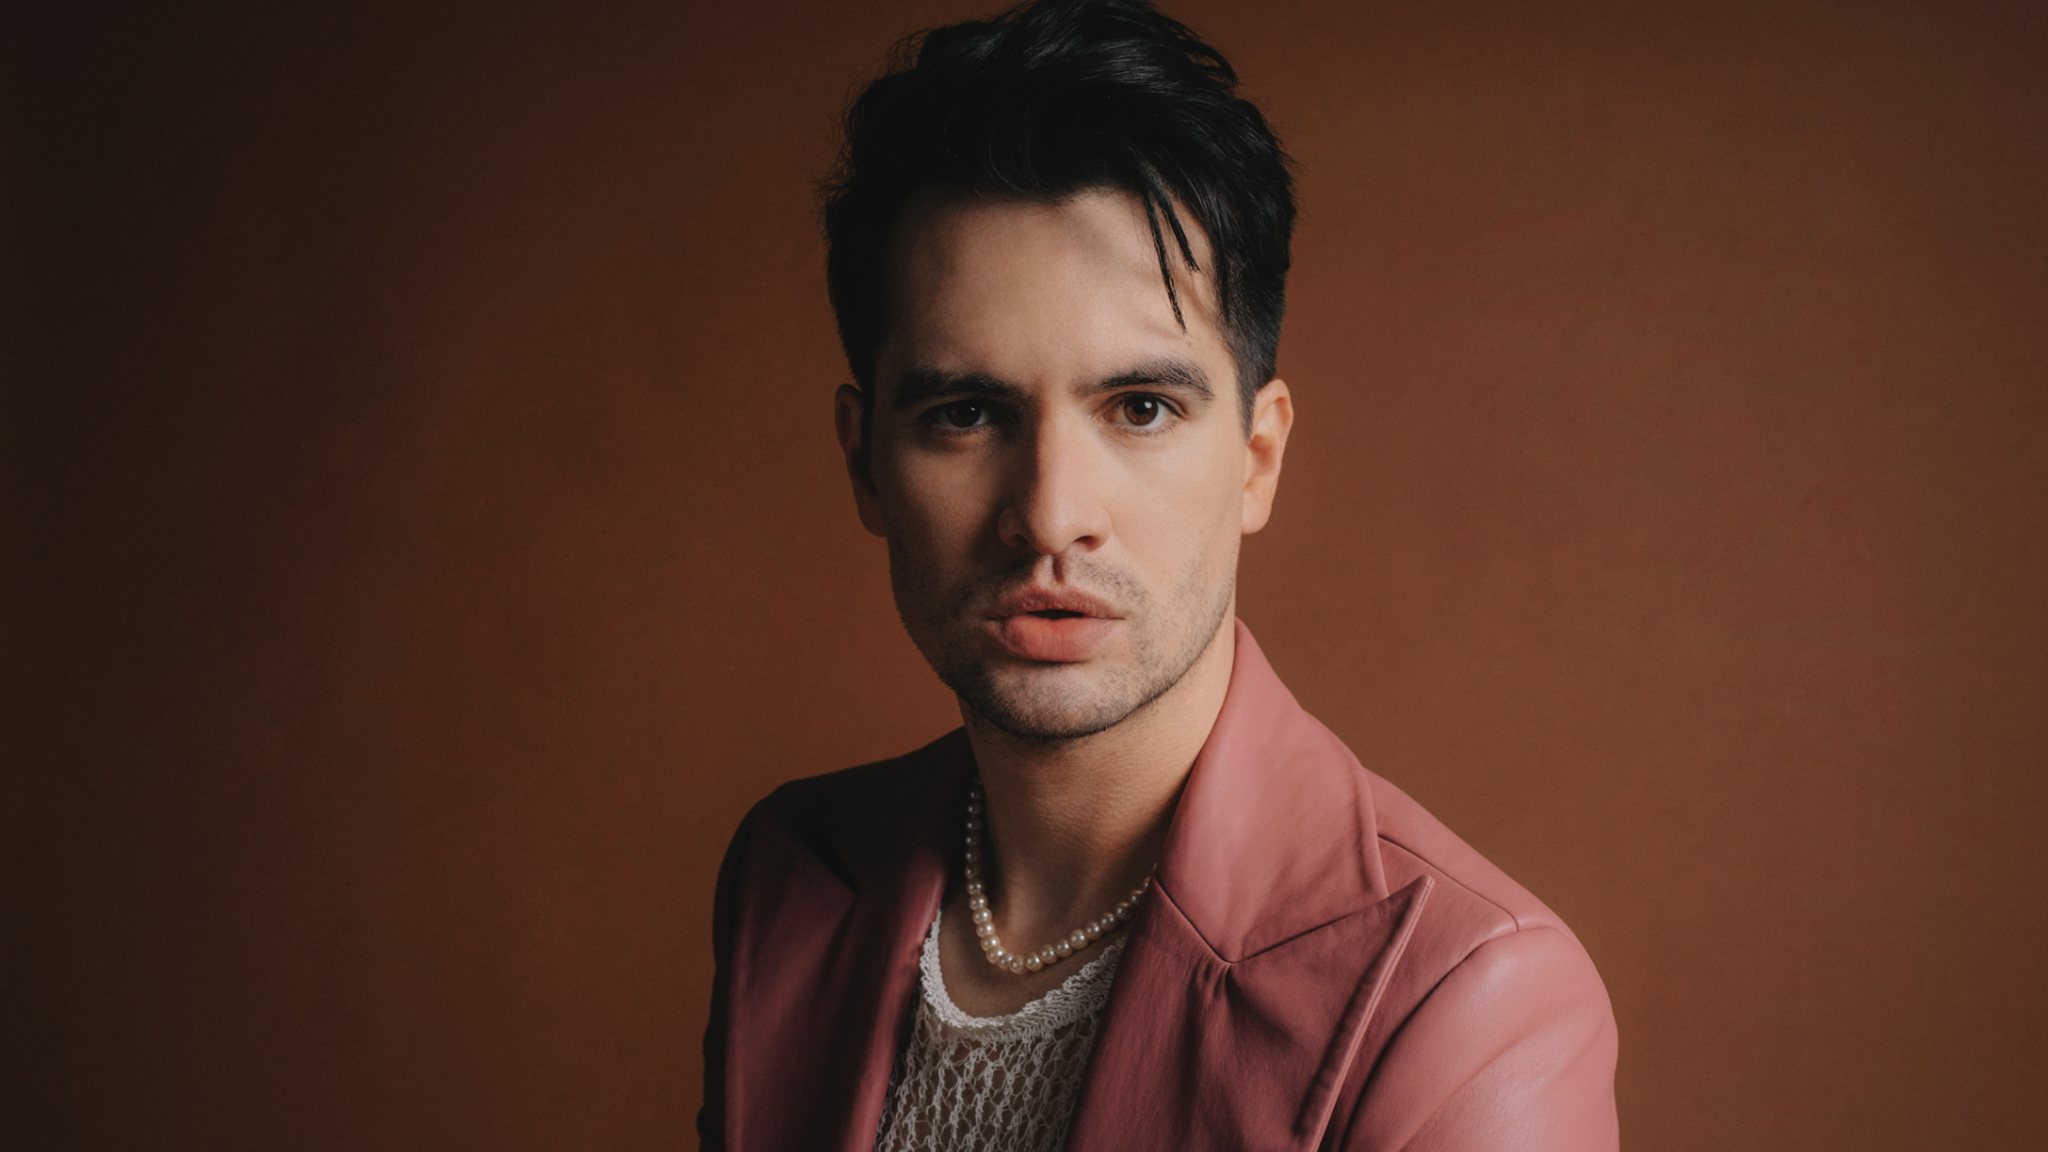 Panic At The Disco Brendon Urie July 2022 credit Alex Stoddard https://rexweyler.com/panic-at-the-disco-will-split-after-spring-european-tour-announces-lead-singer-brendon-urie/